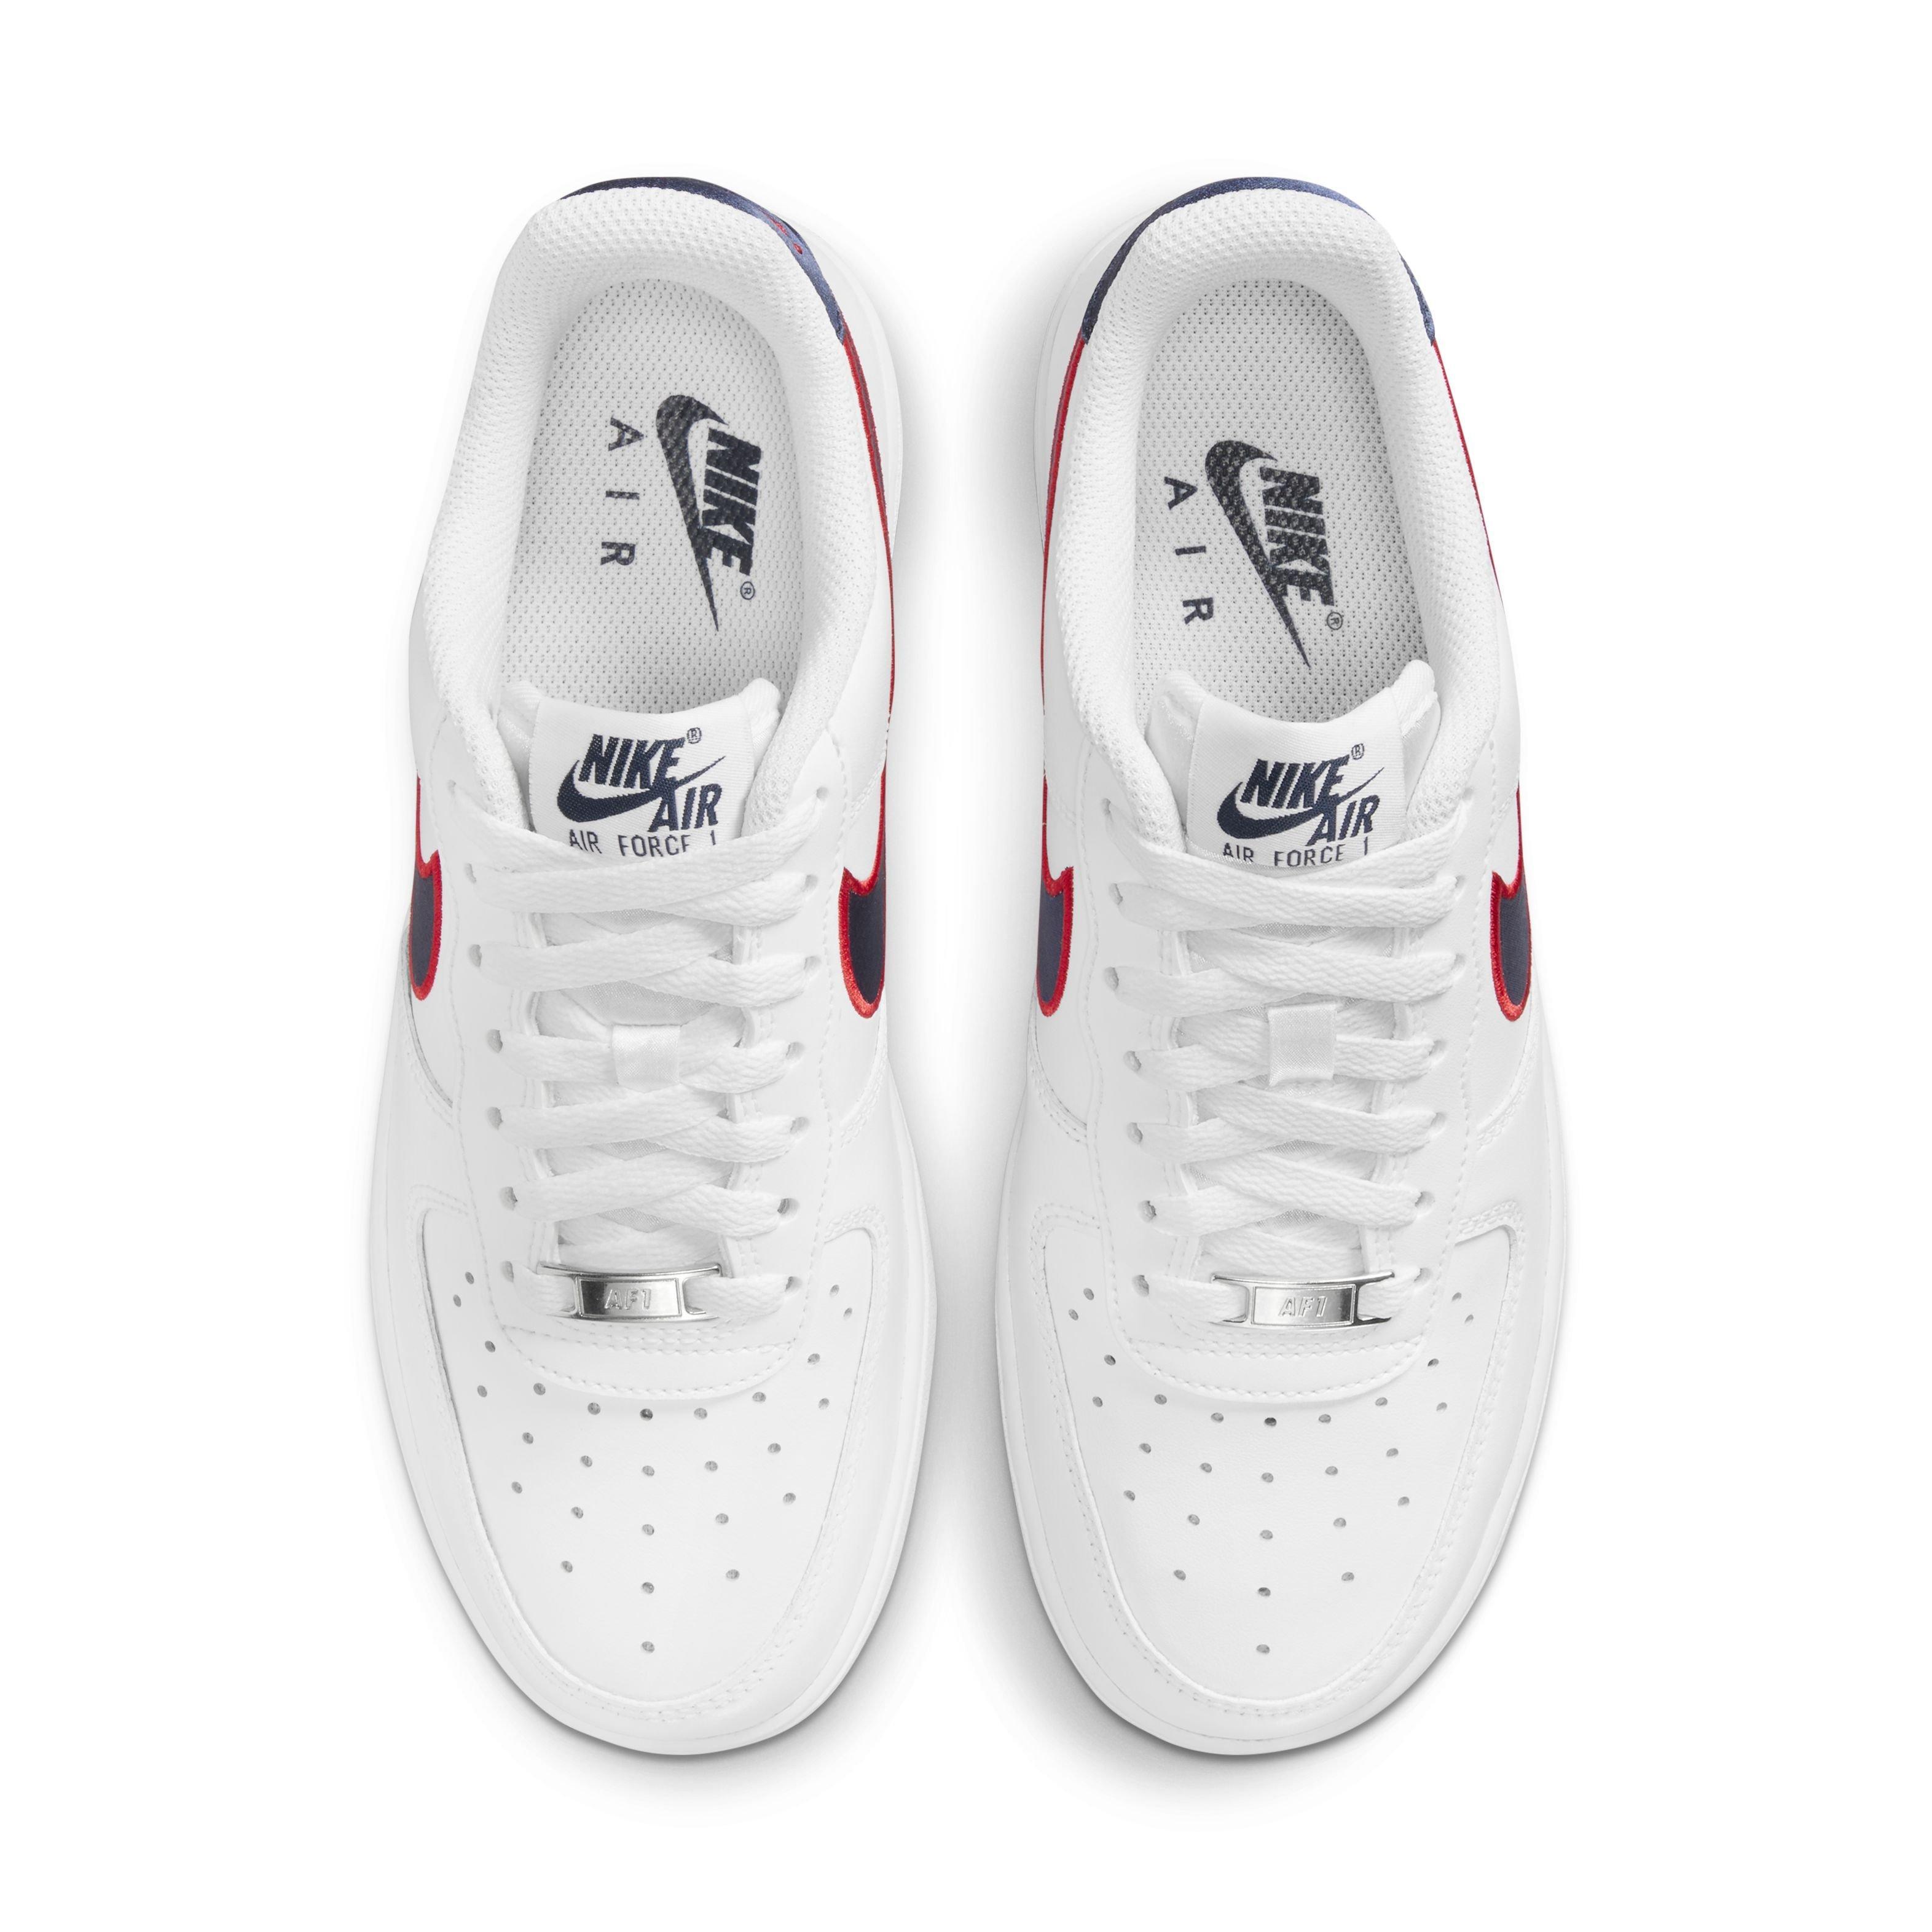 Titolo Shop - Nike Air Force 1 '07 LV8 in Obsidian/Cool